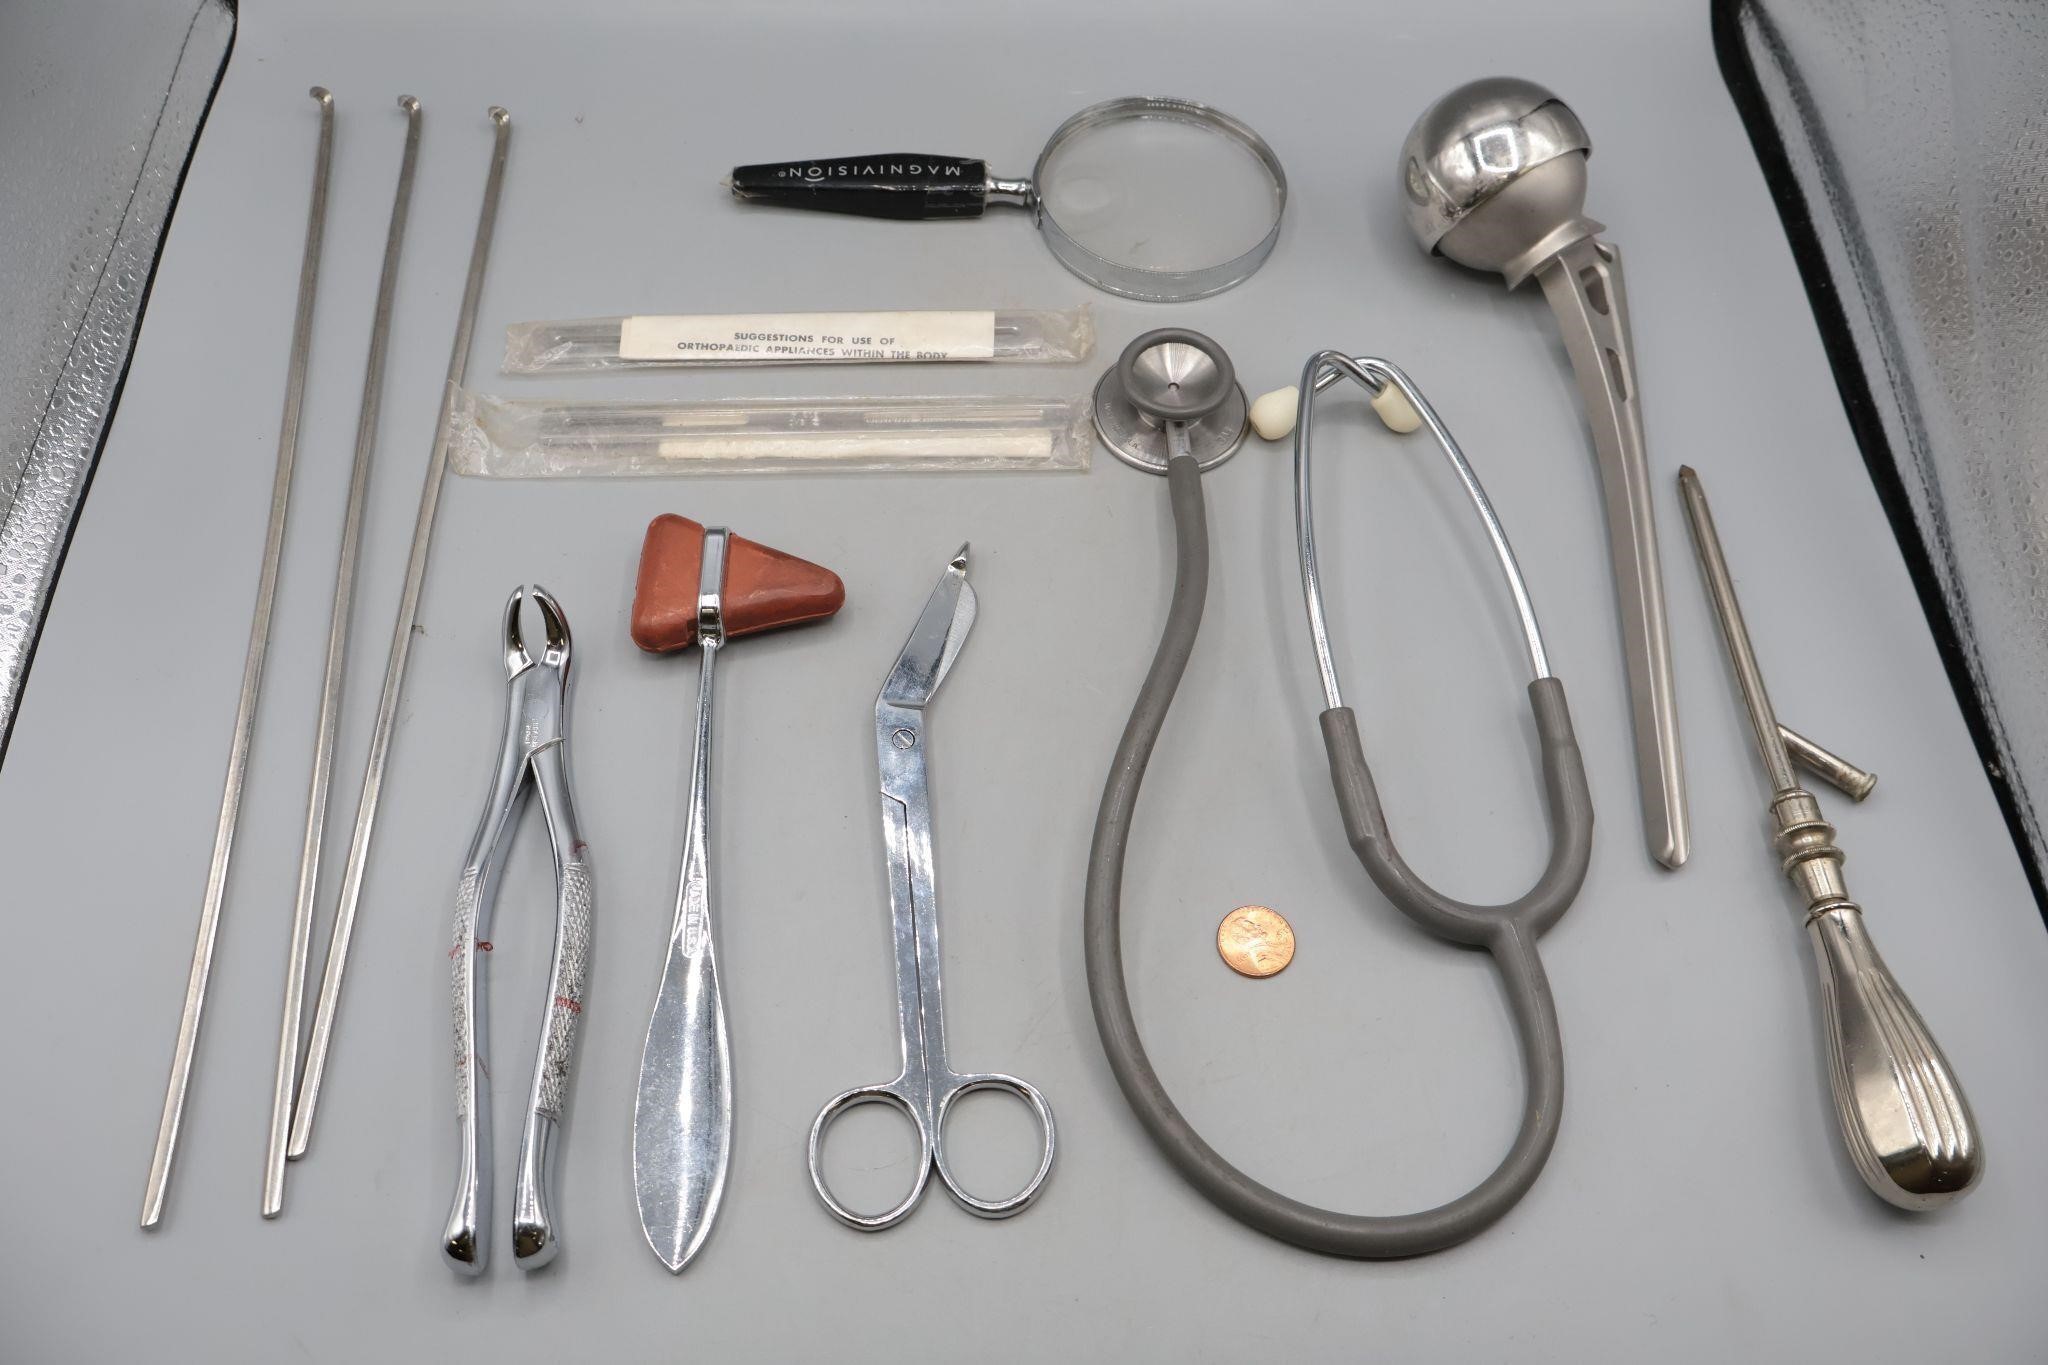 11 Strange & Curious Surgical/Medical Tools